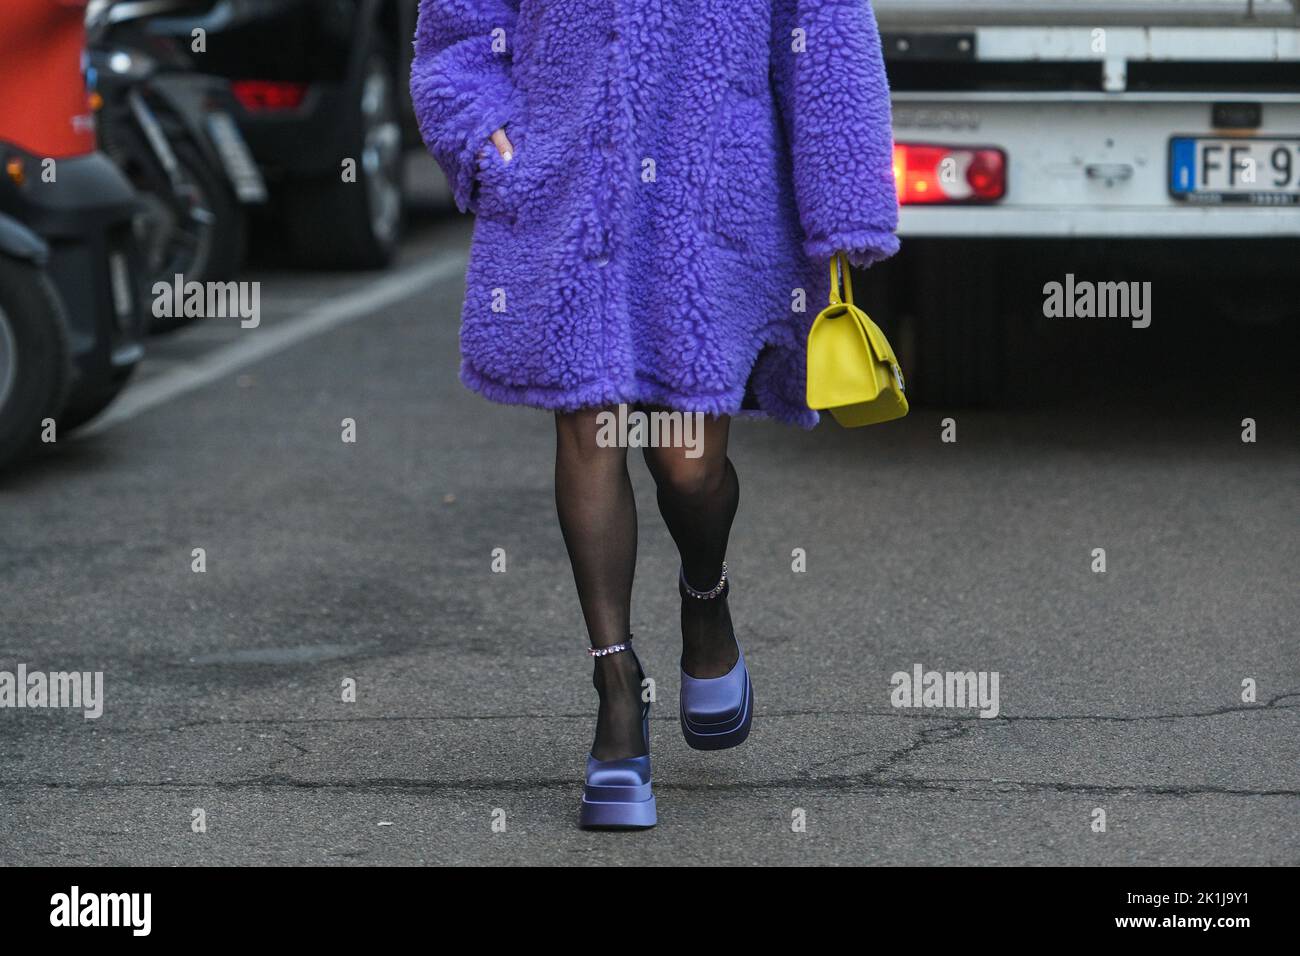 Milan, Italy - February, 24: Street style, woman wearing a furry purple coat, yellow bag and purple sandals.. Stock Photo